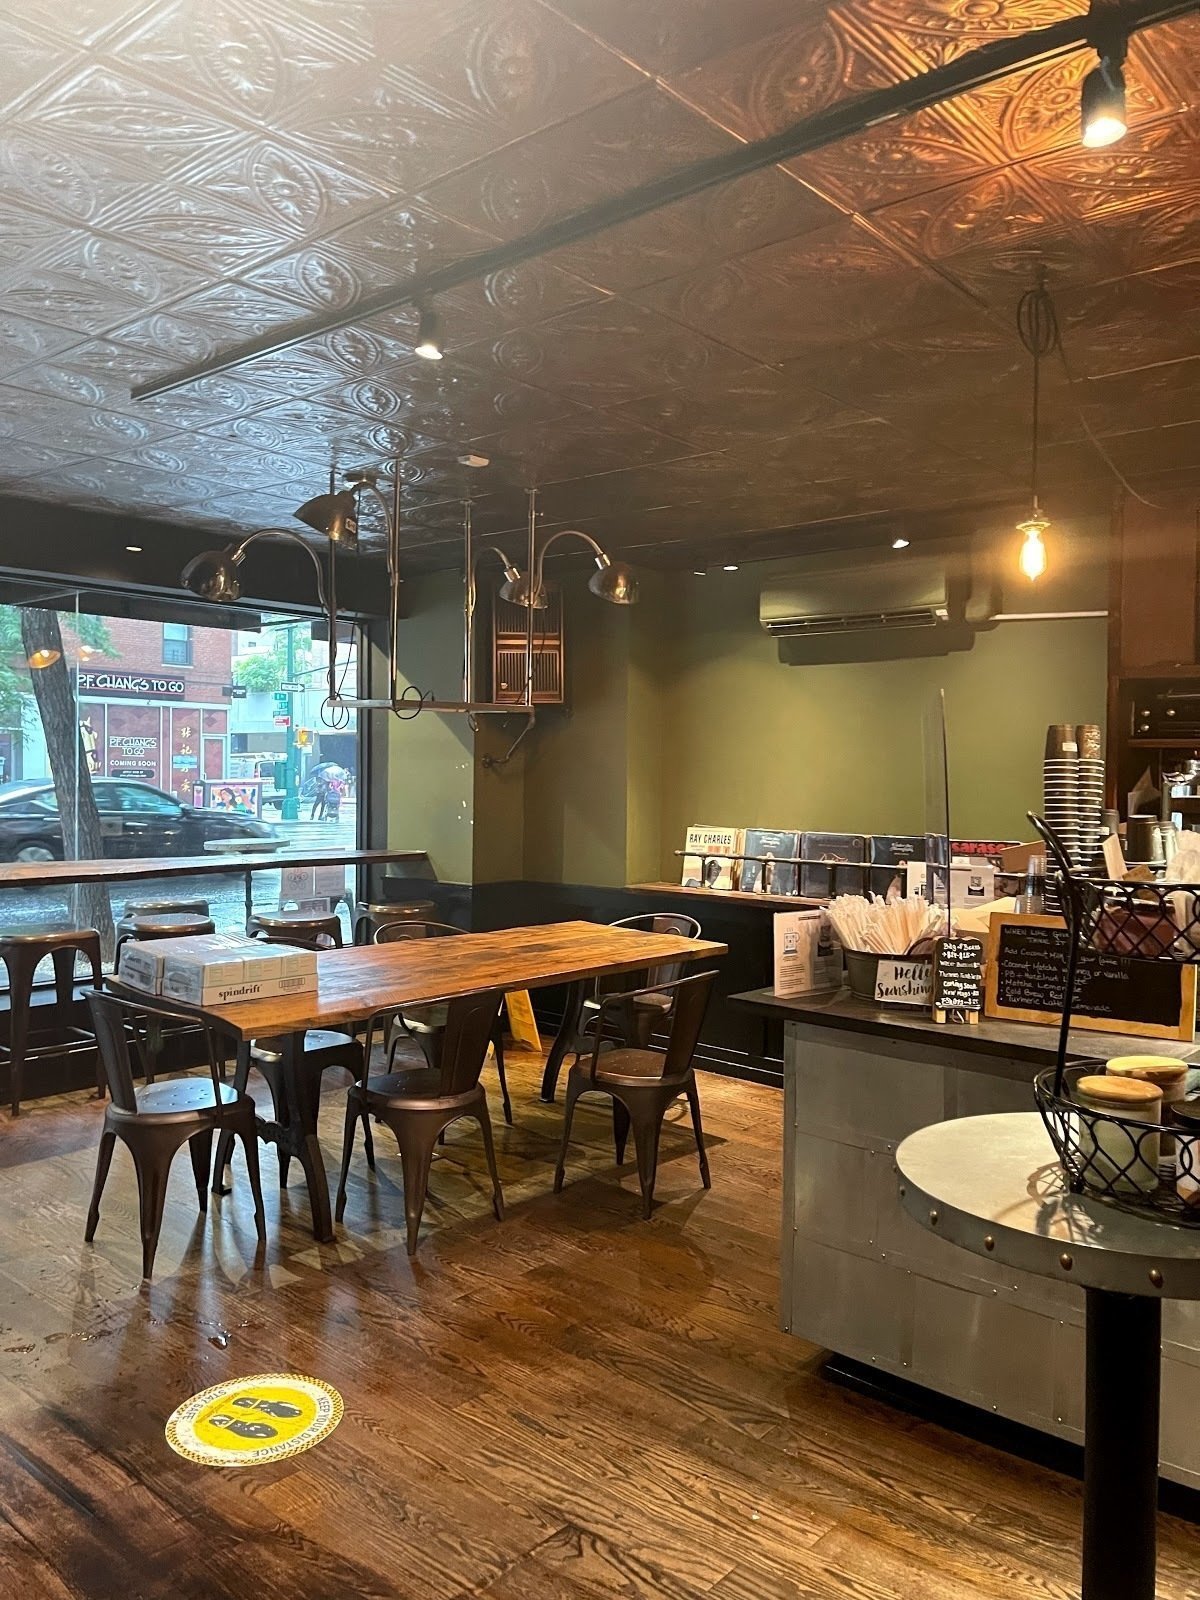 Ground Central Coffee Company: A Work-Friendly Place in New York